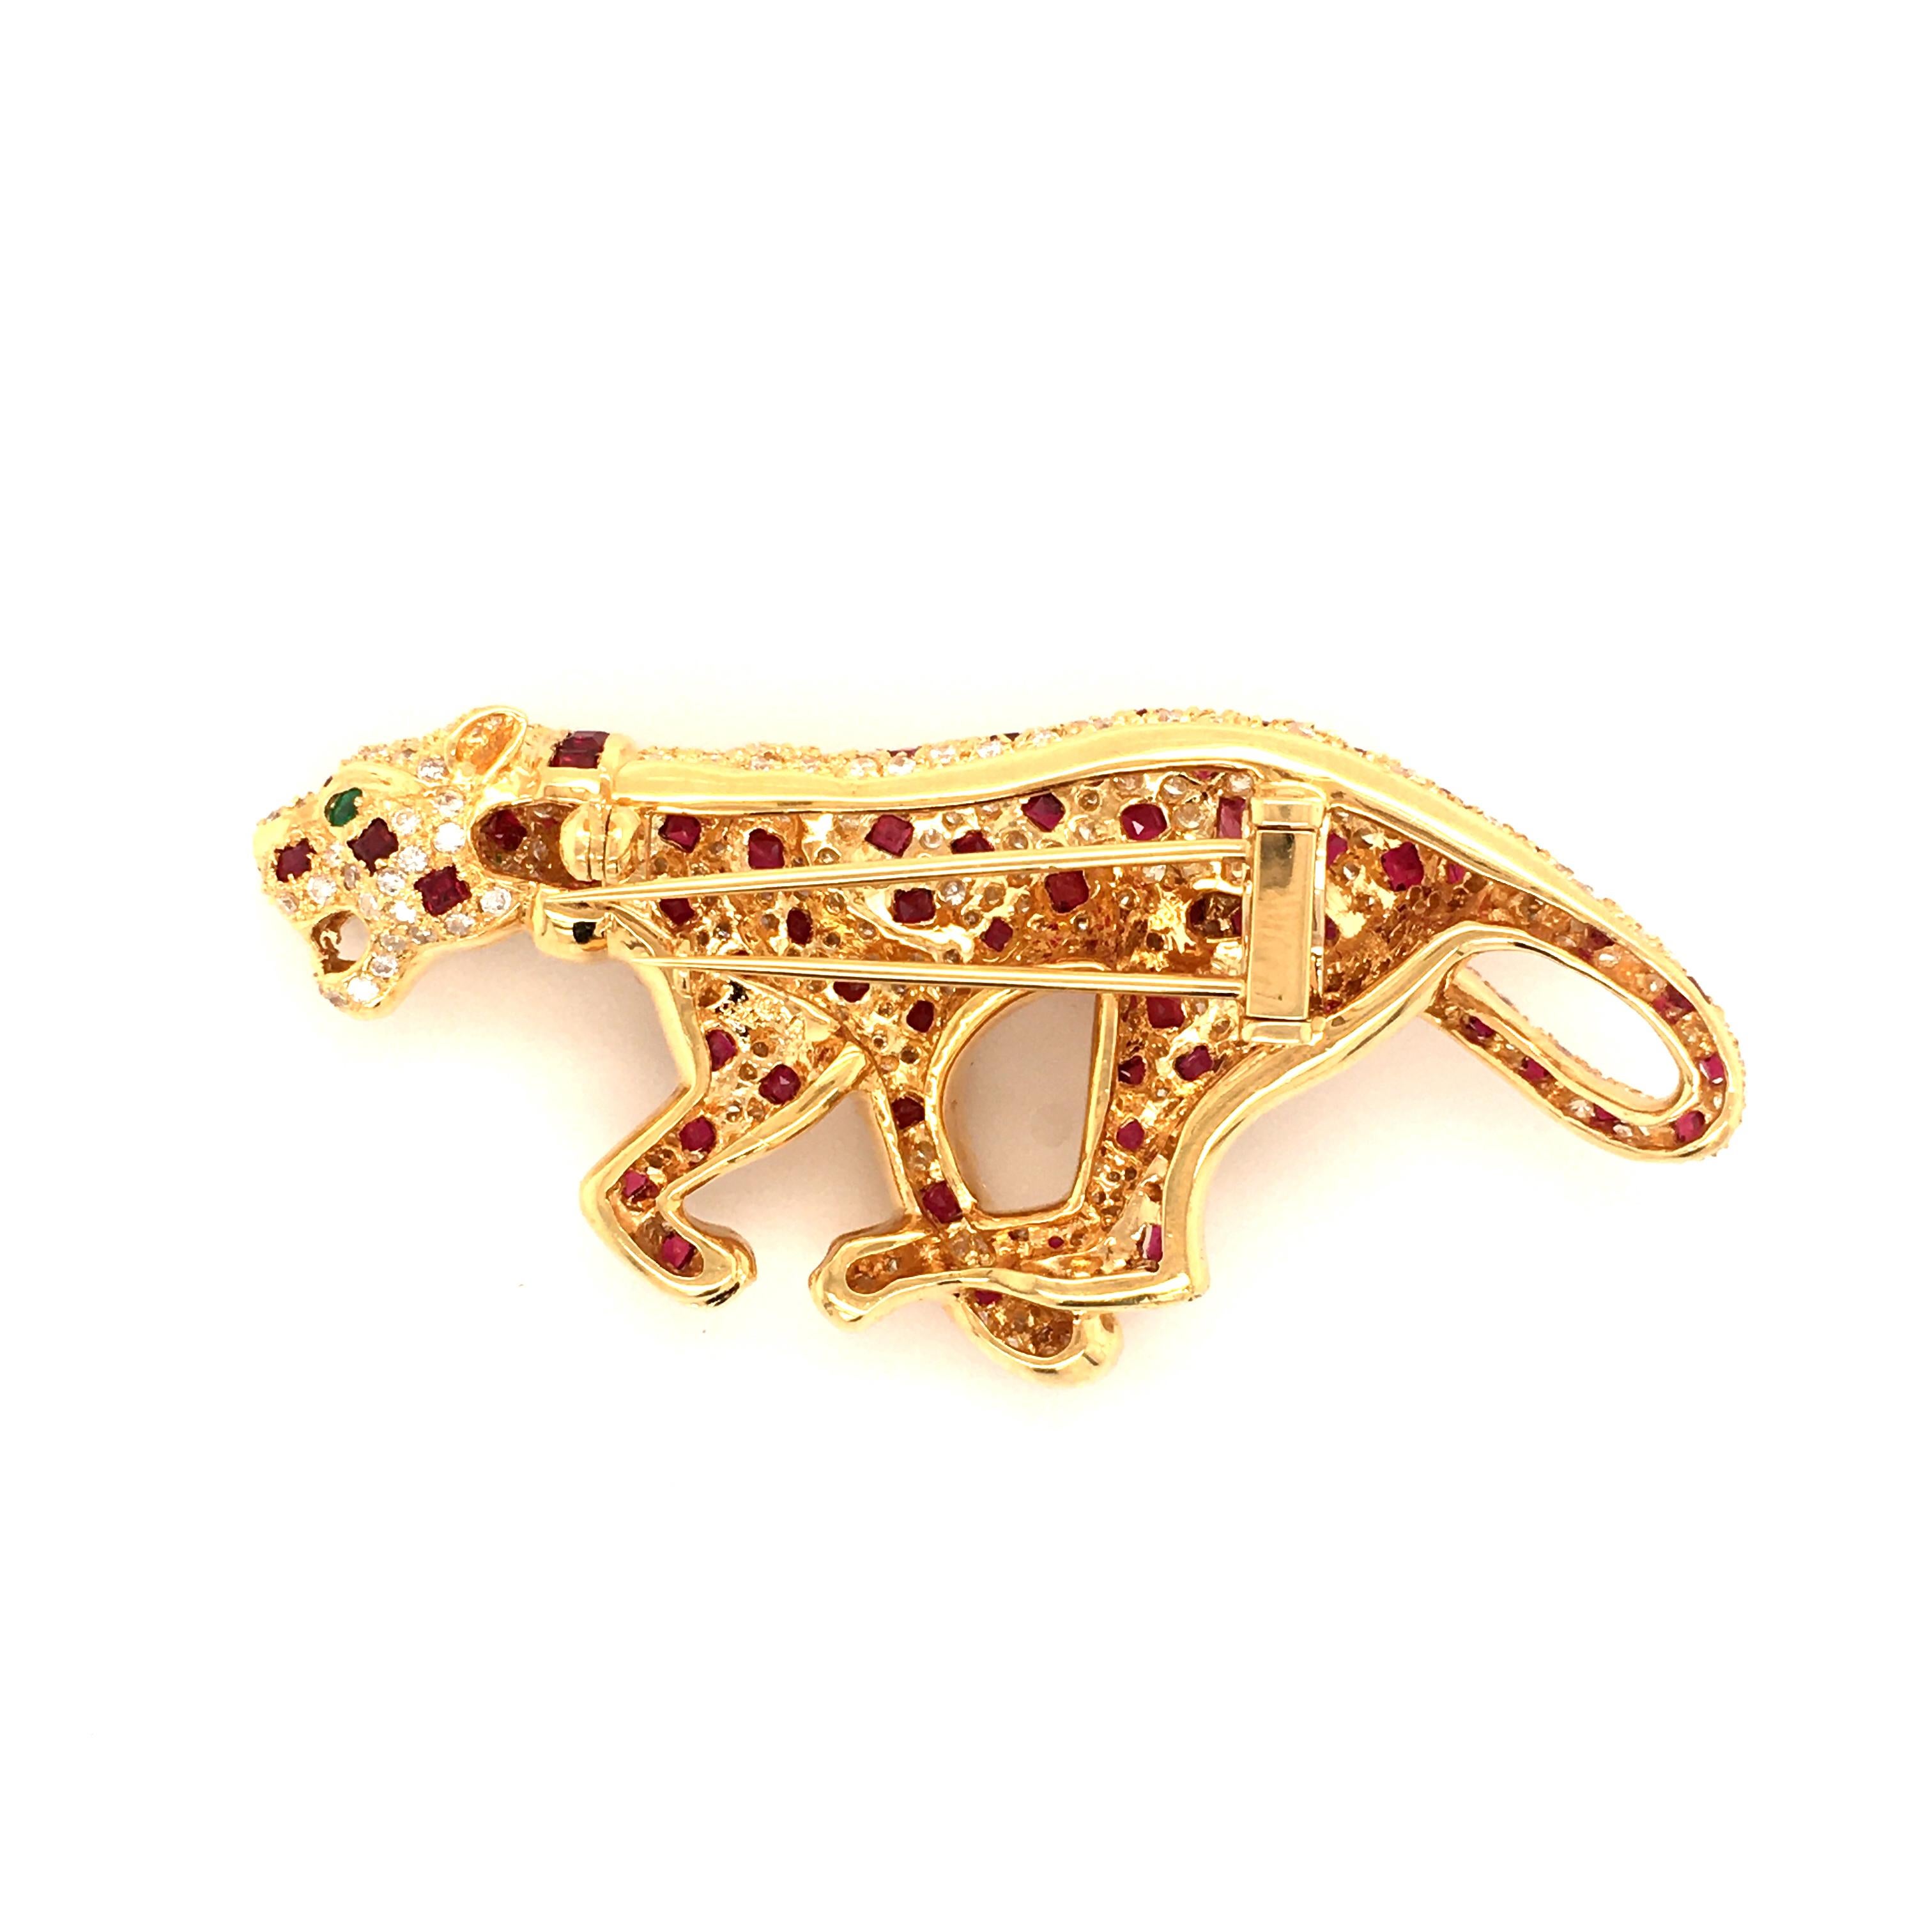 Unique Panther Brooch with Rubies and Diamonds in 18 Karat Yellow Gold 3